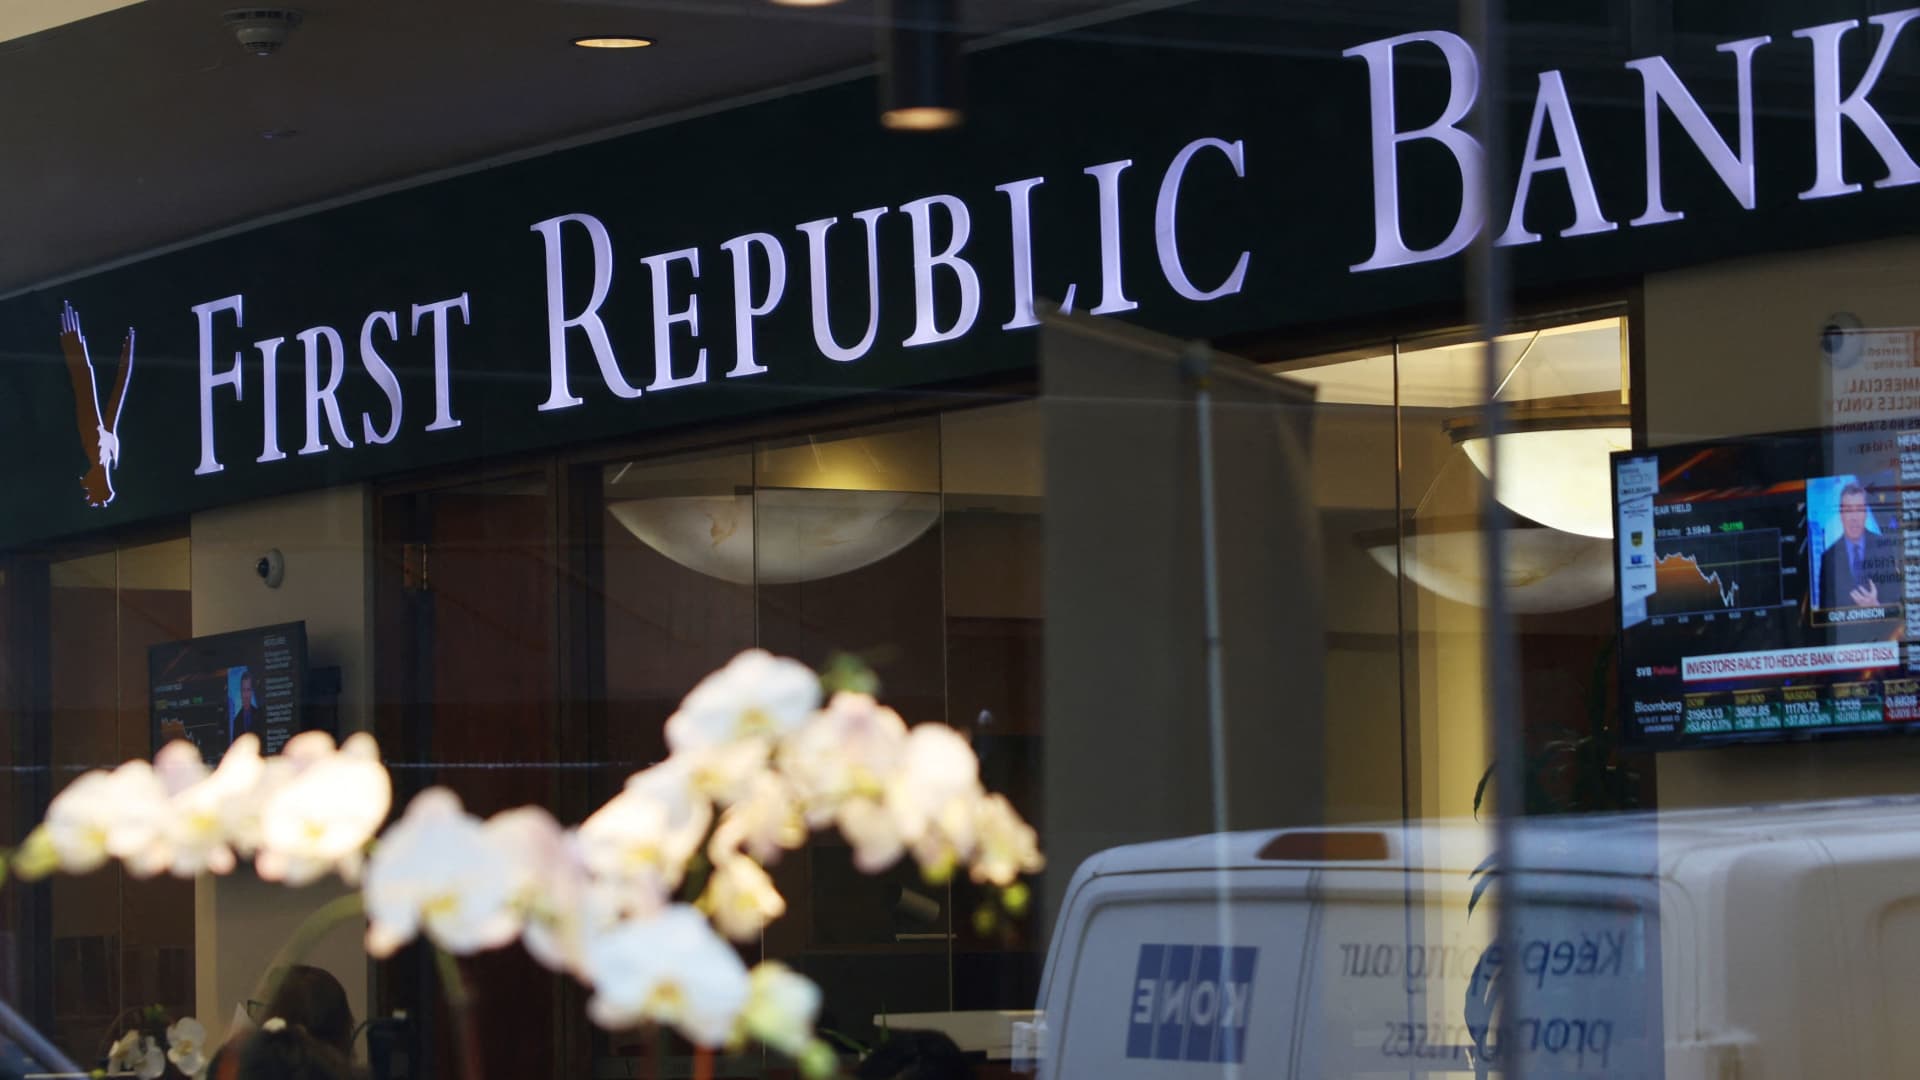 First Republic shares slid almost 33% after deposit infusion, dragging down other regional banks